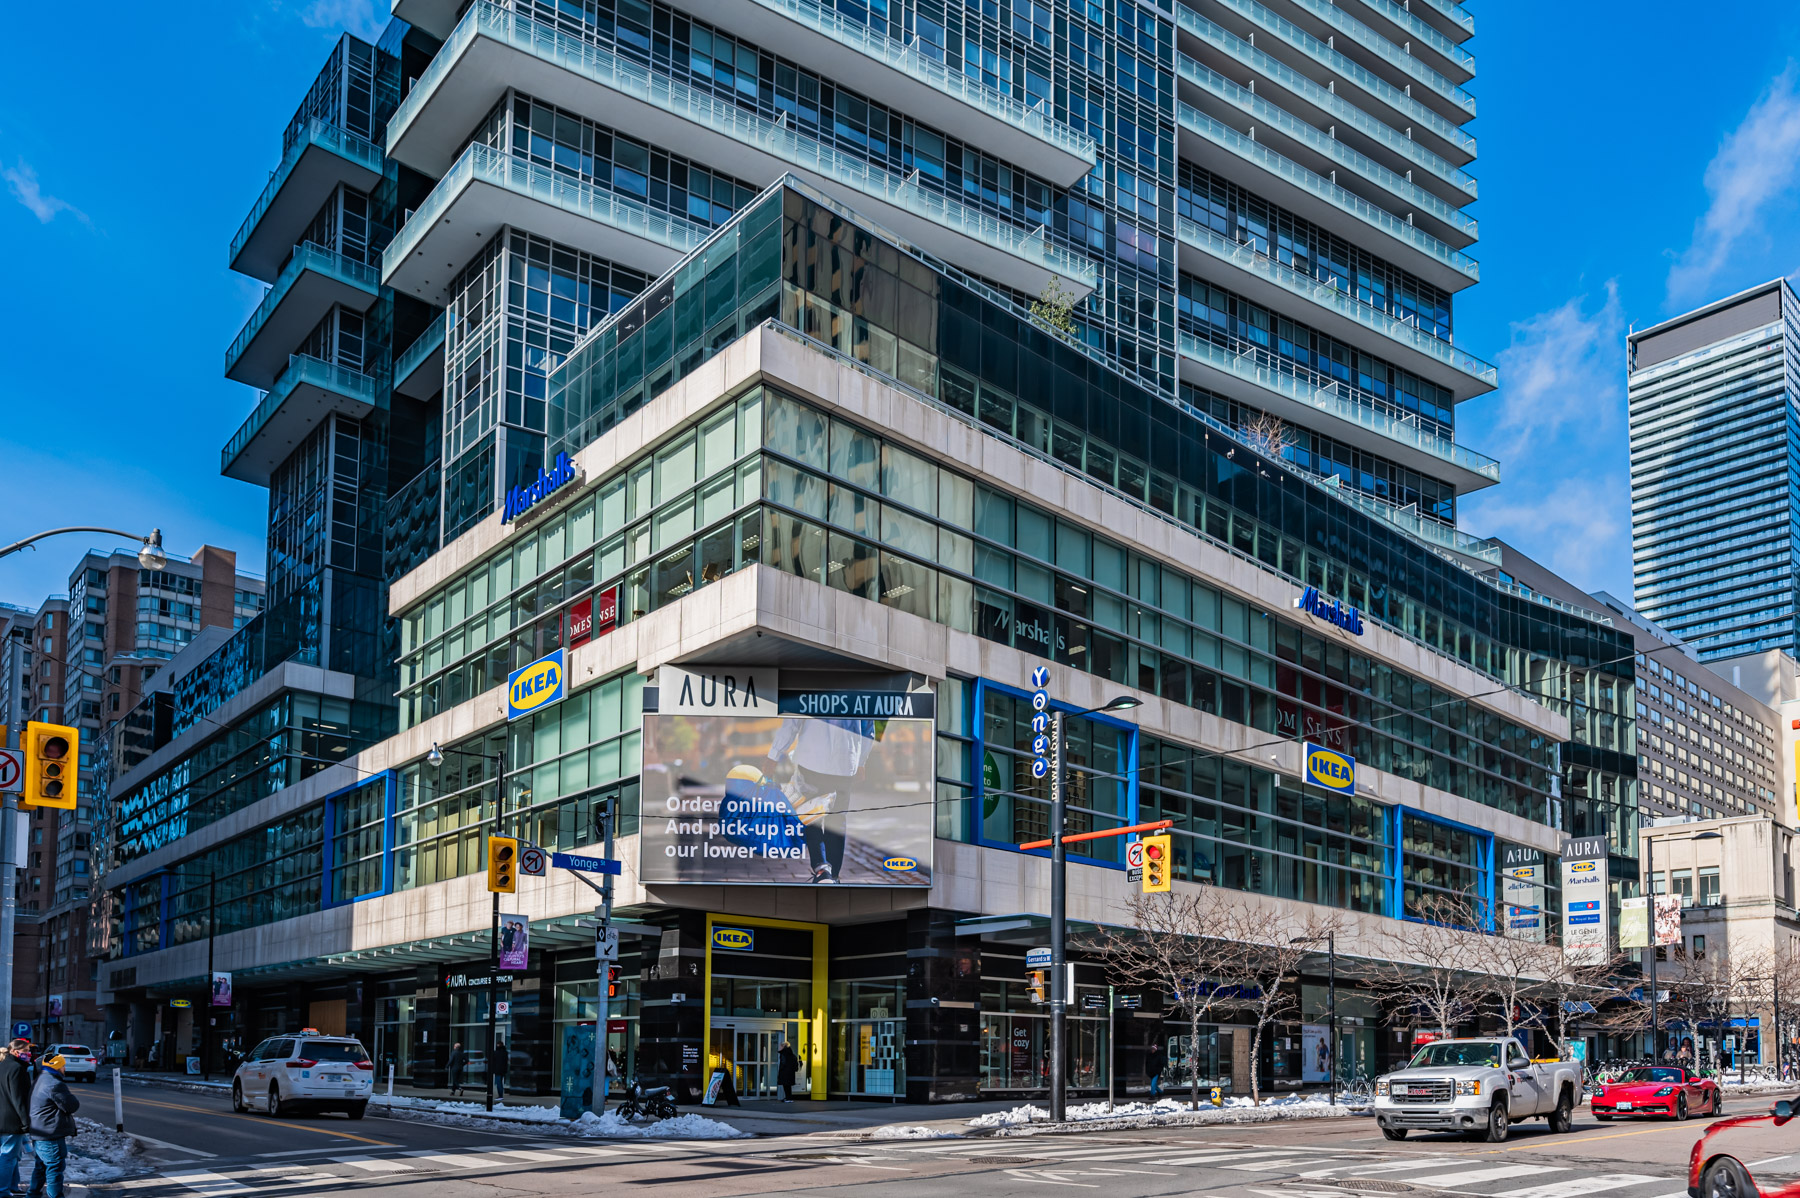 Exterior of Aura Condos glass podium with IKEA and Marshalls stores.